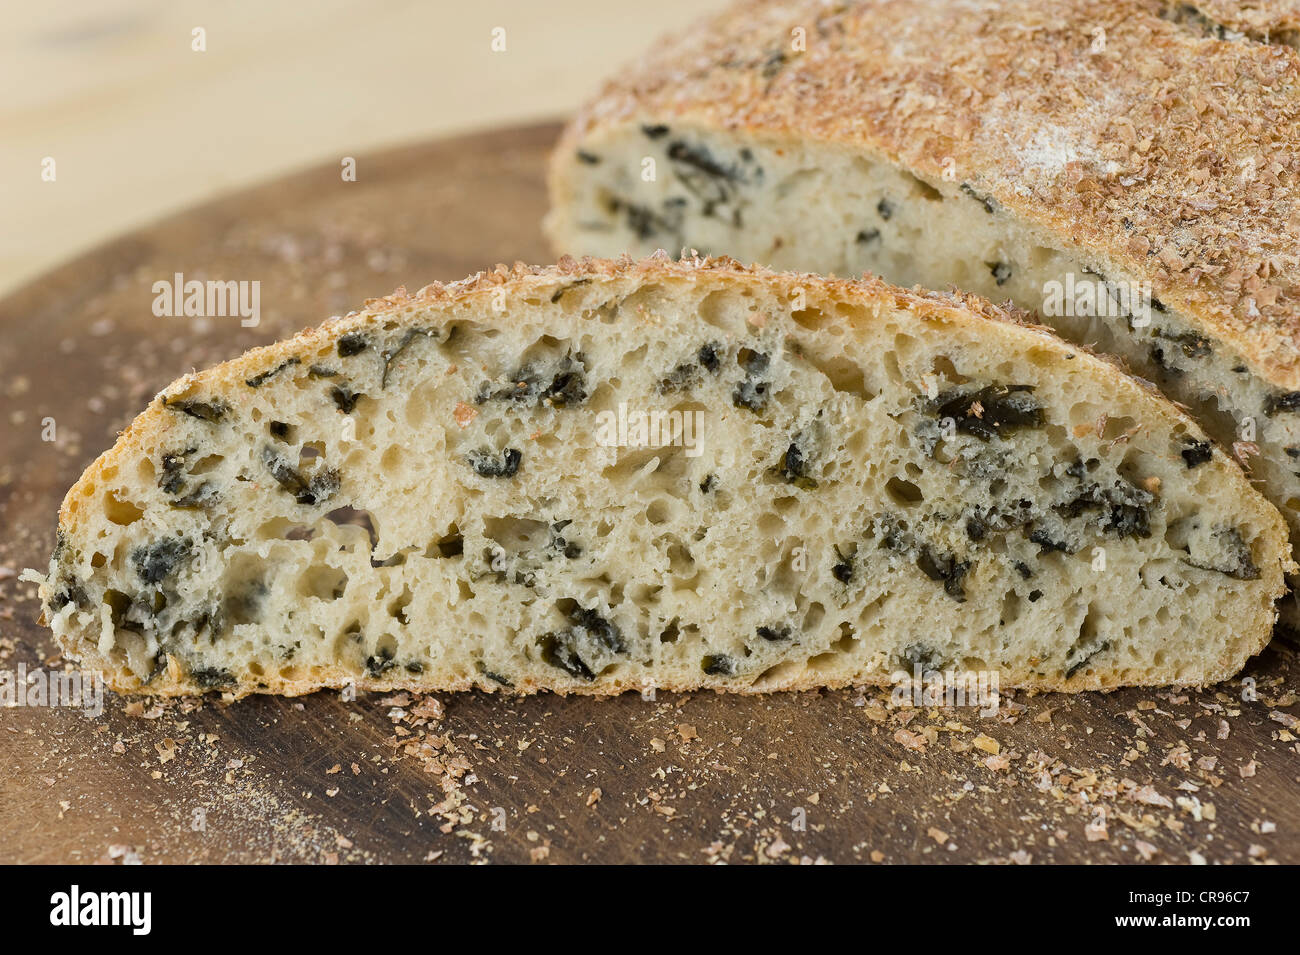 Pot bread with wakame seaweed, No-Knead Bread, recipe is available Stock Photo